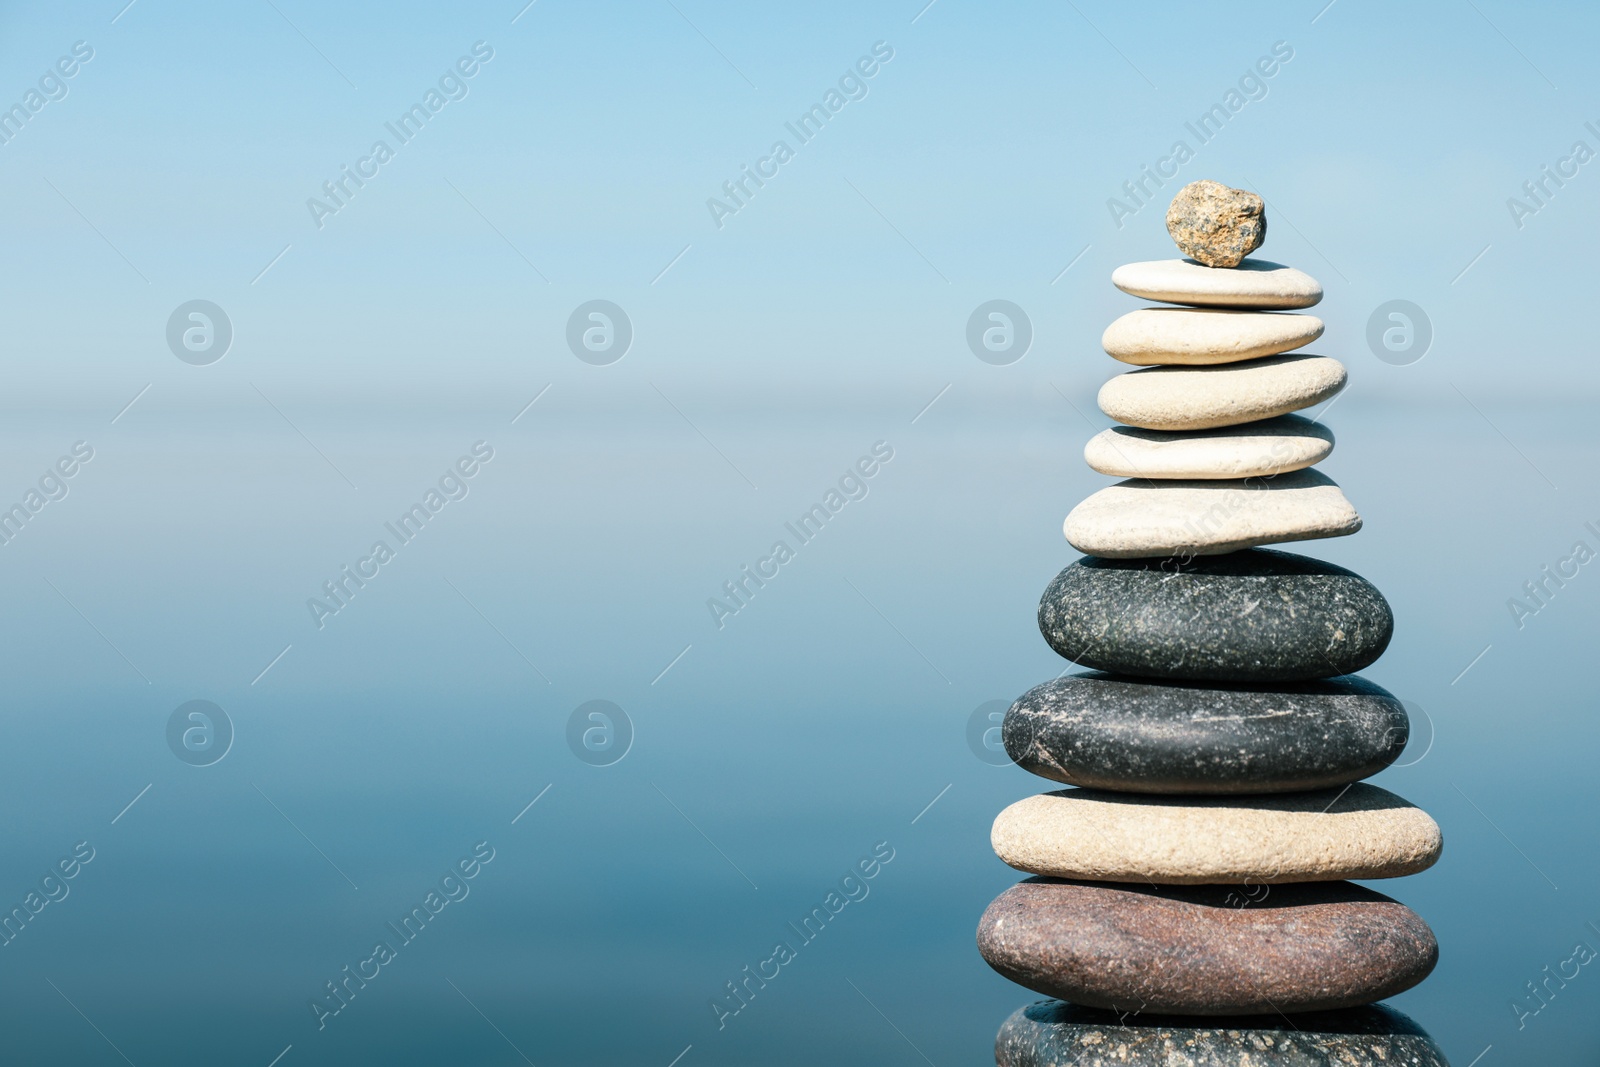 Photo of Stack of stones near sea, space for text. Harmony and balance concept